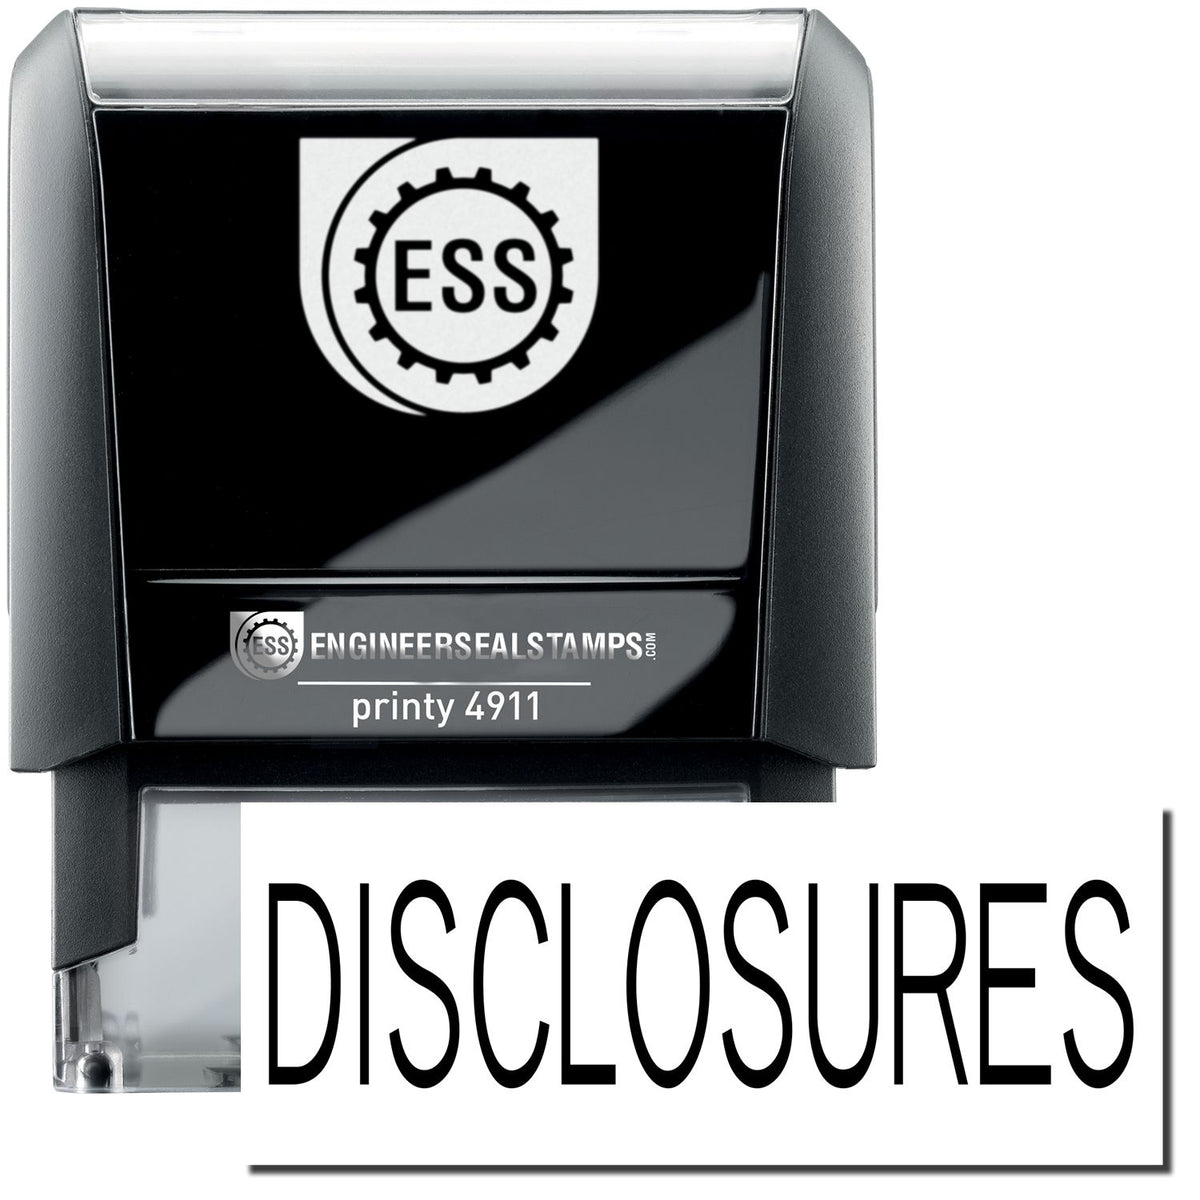 A self-inking stamp with a stamped image showing how the text &quot;DISCLOSURES&quot; is displayed after stamping.